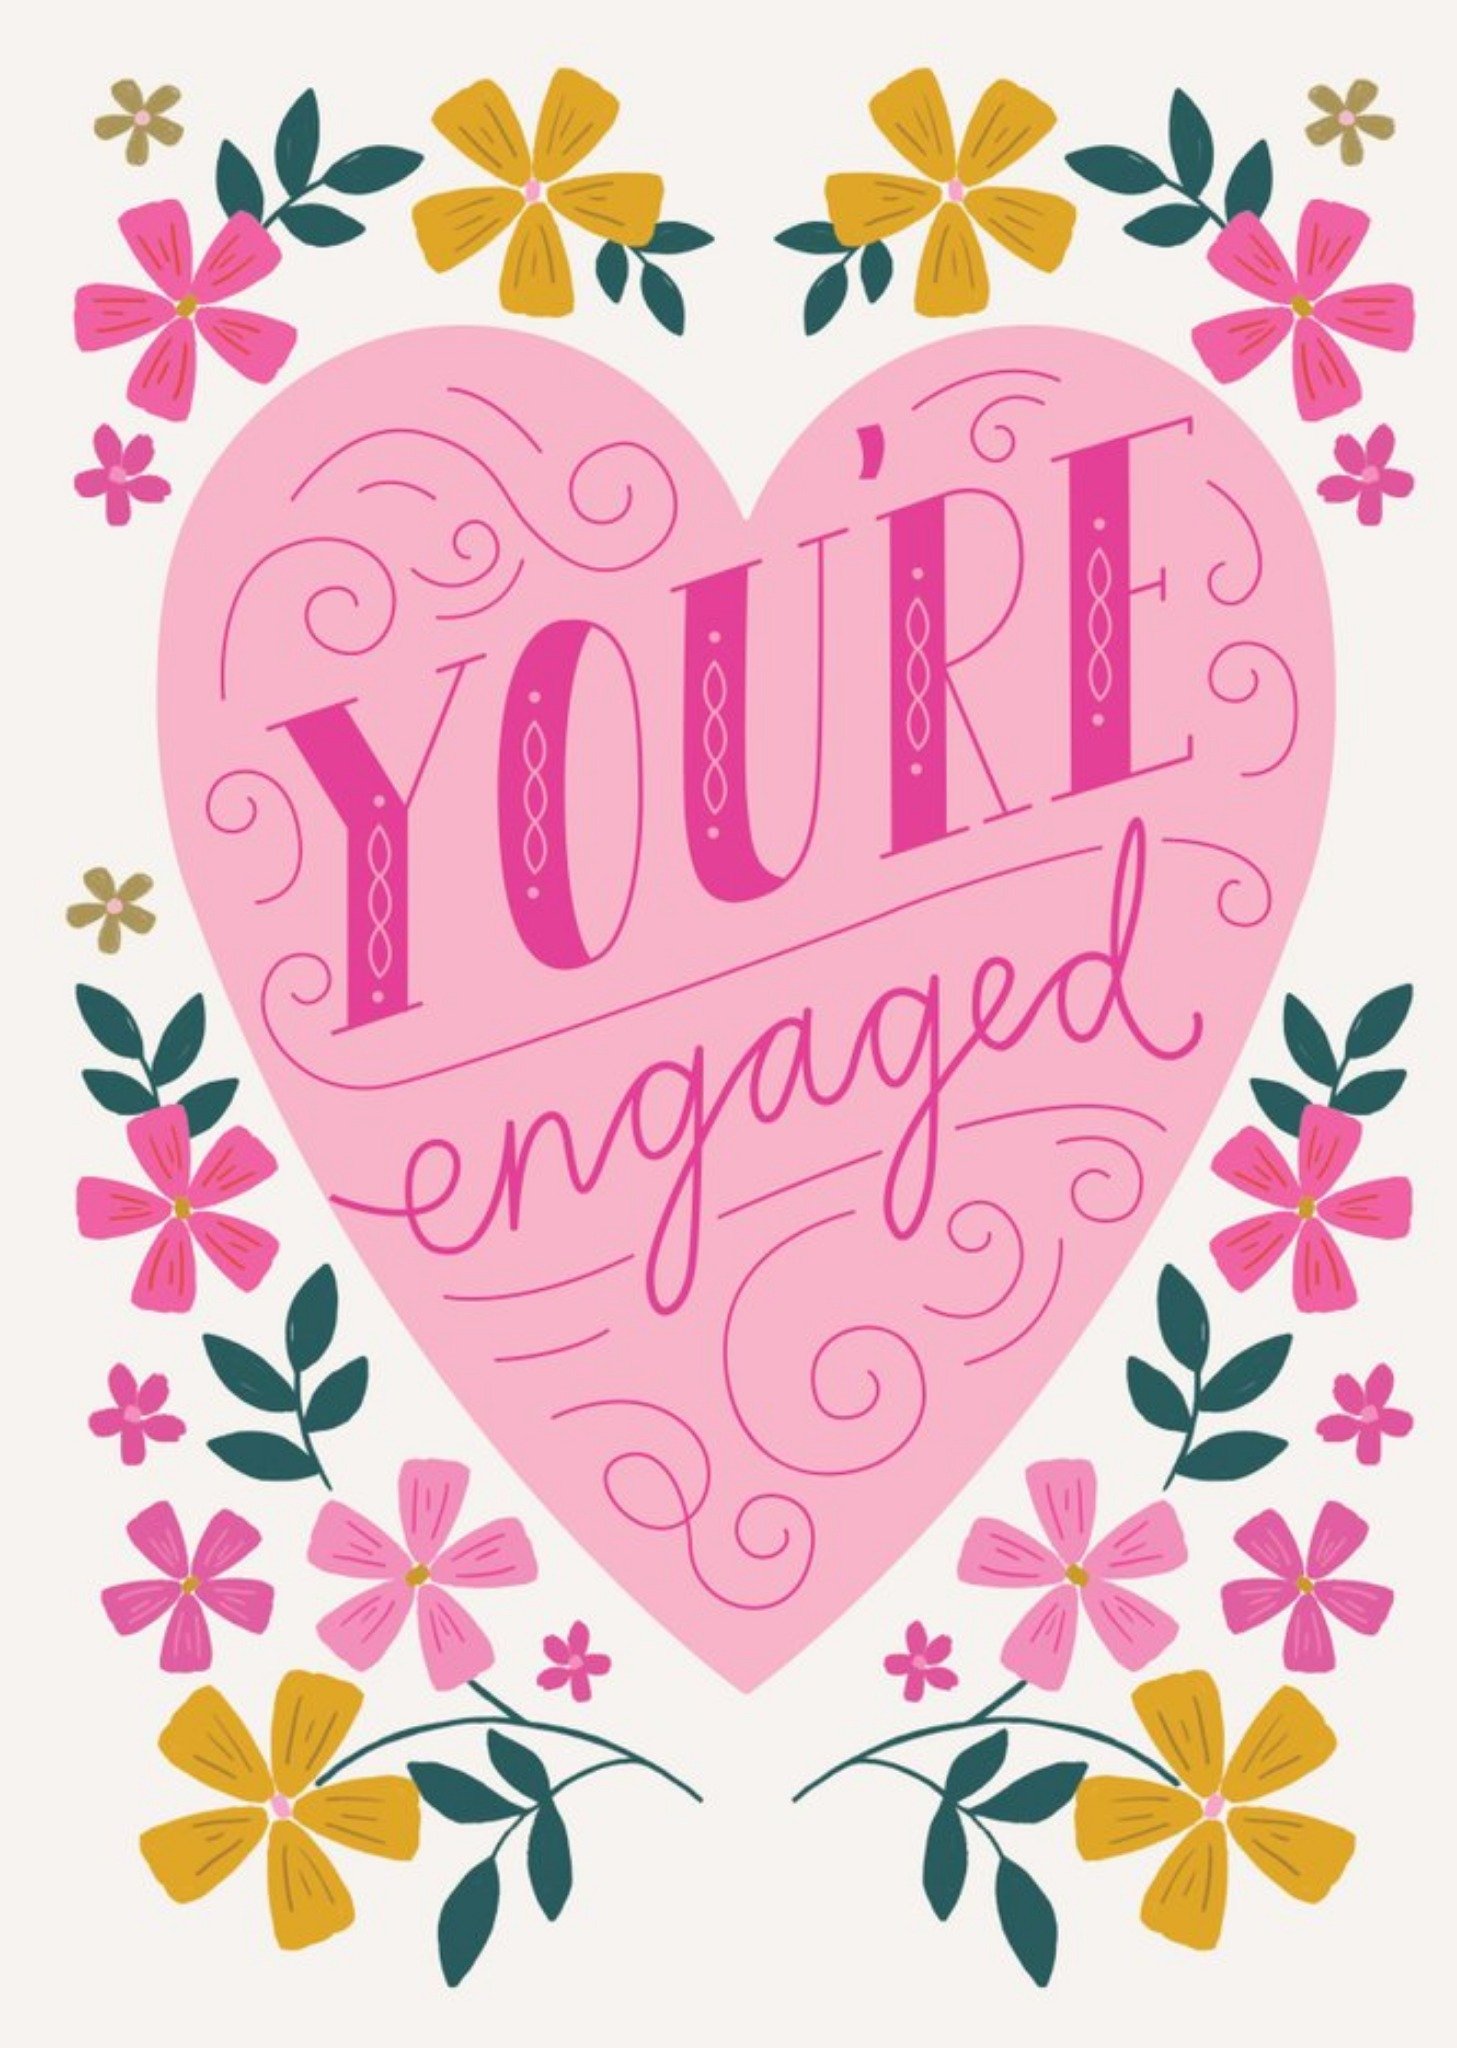 Moonpig You Are Engaged Floral Heart Card Ecard